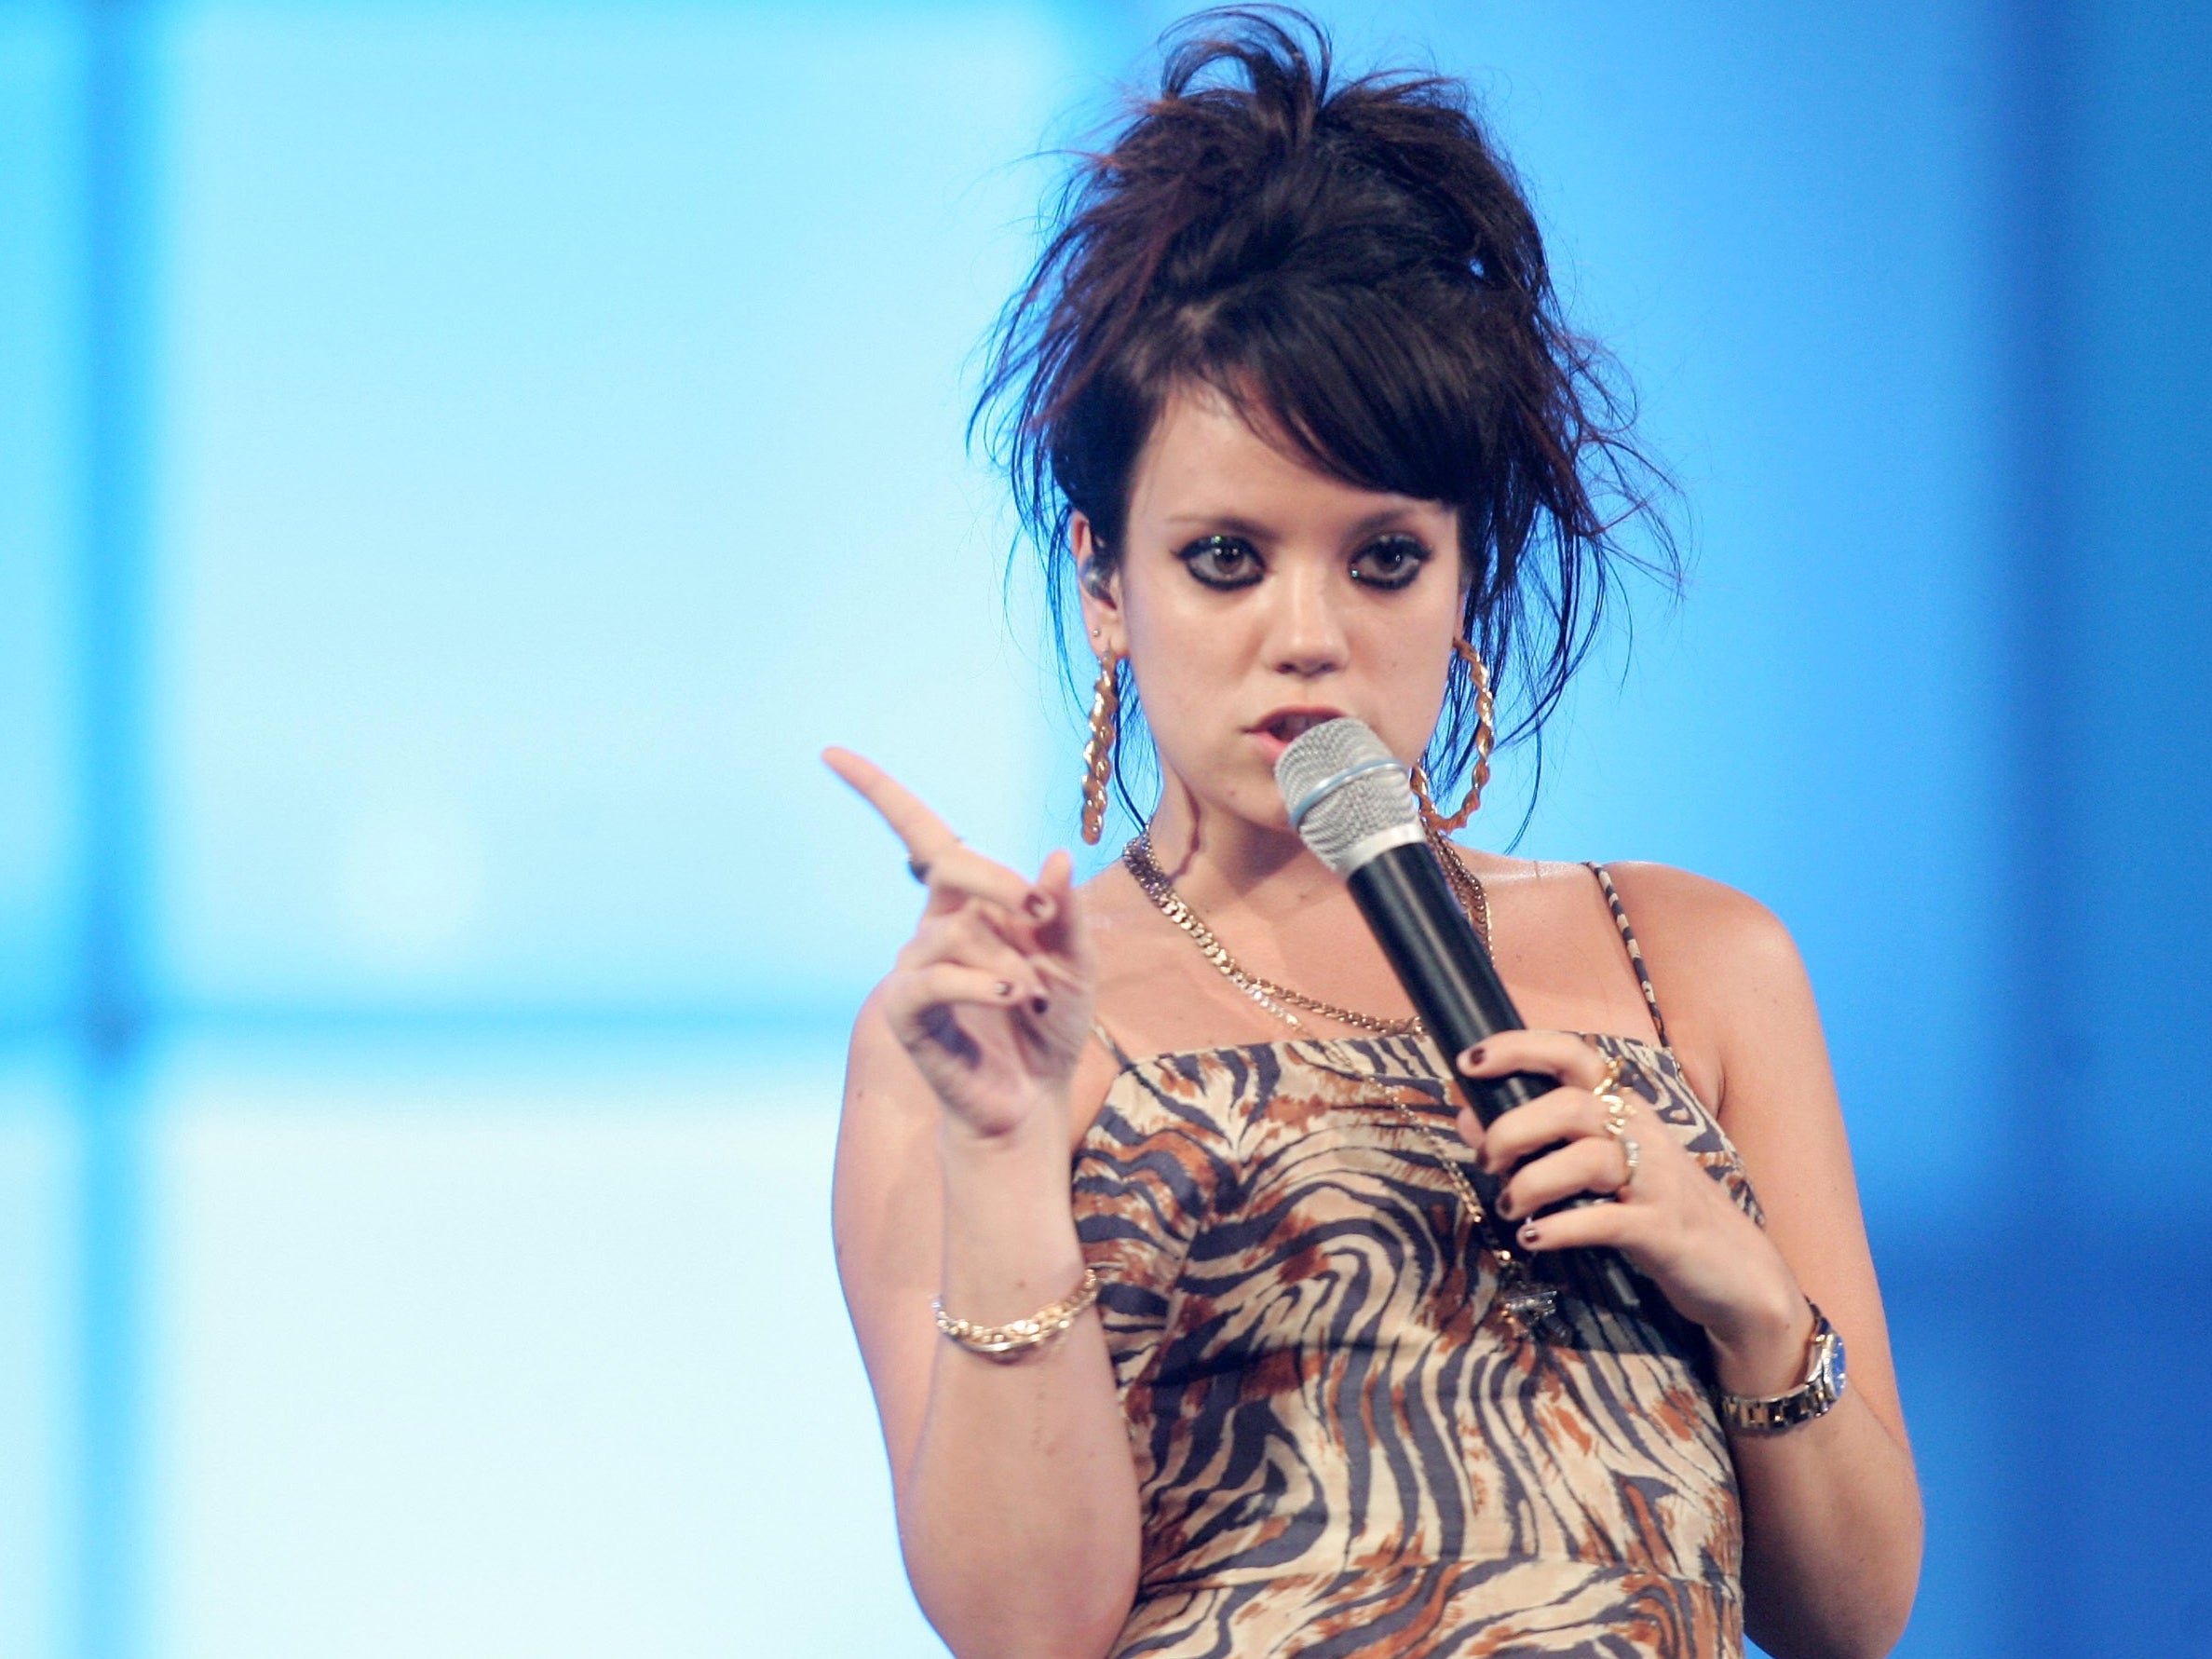 Lily Allen performing in Germany in 2006